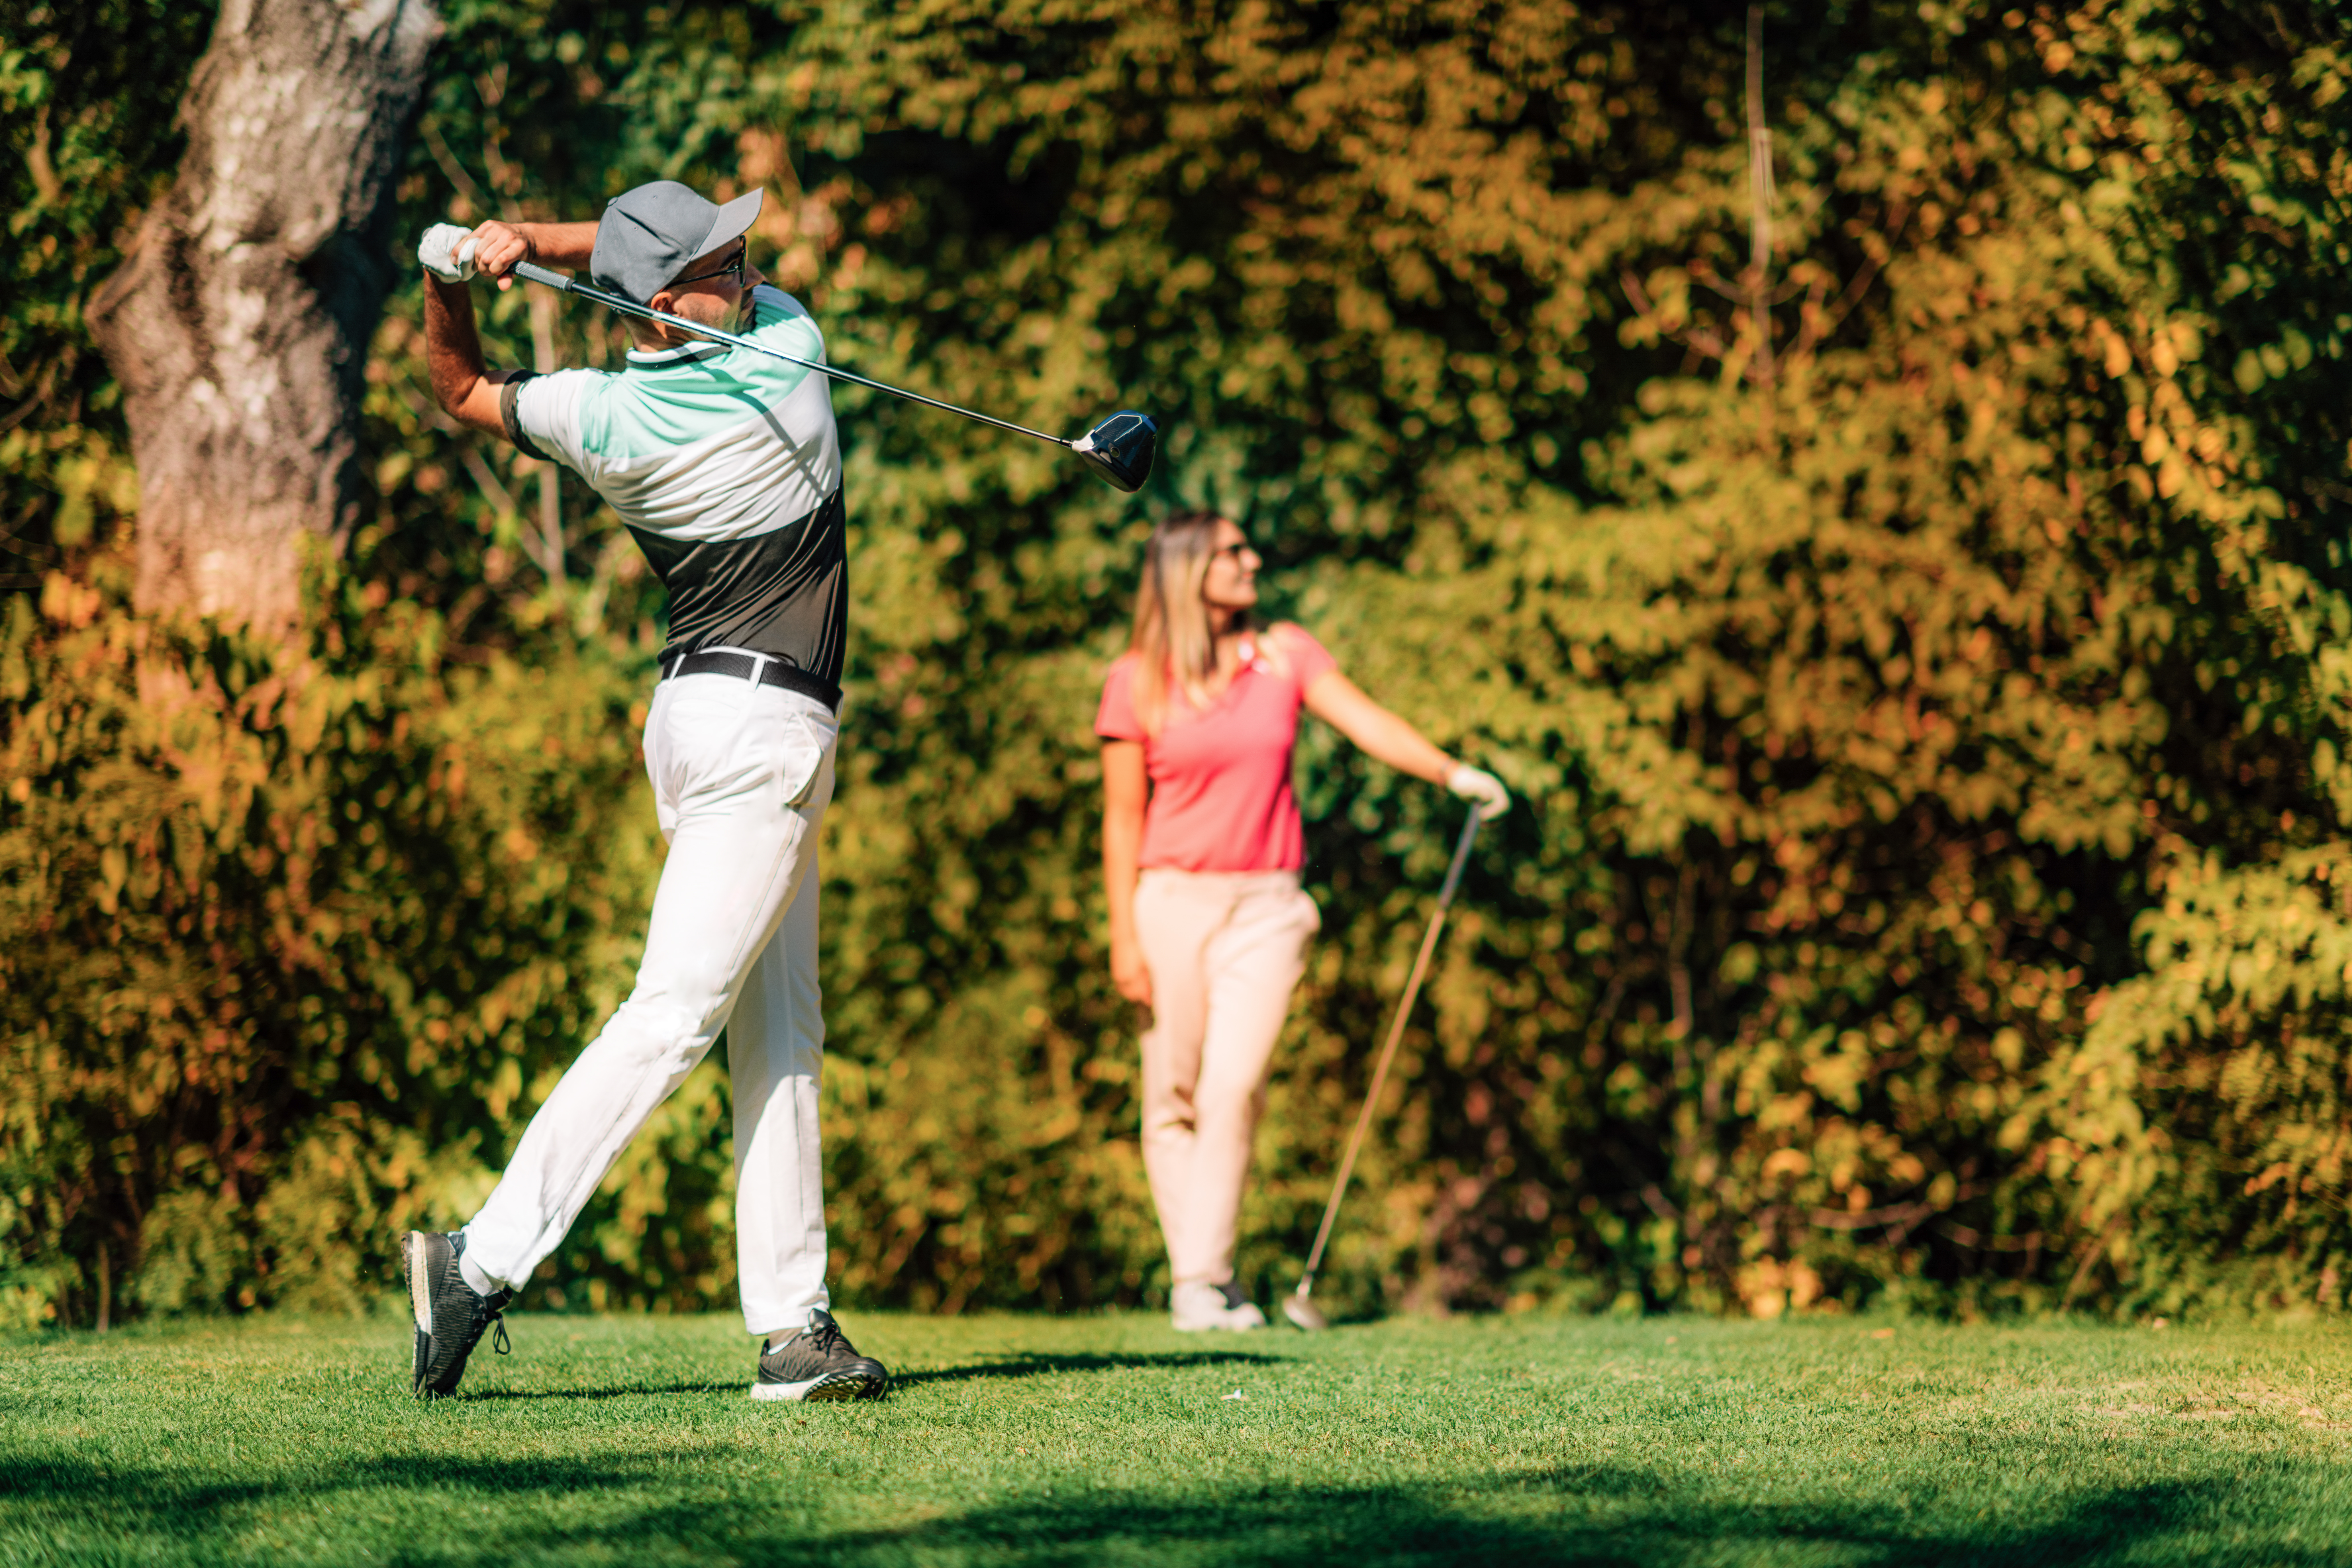 Golfing couple. Man in the swing position, lady following the ball in flight